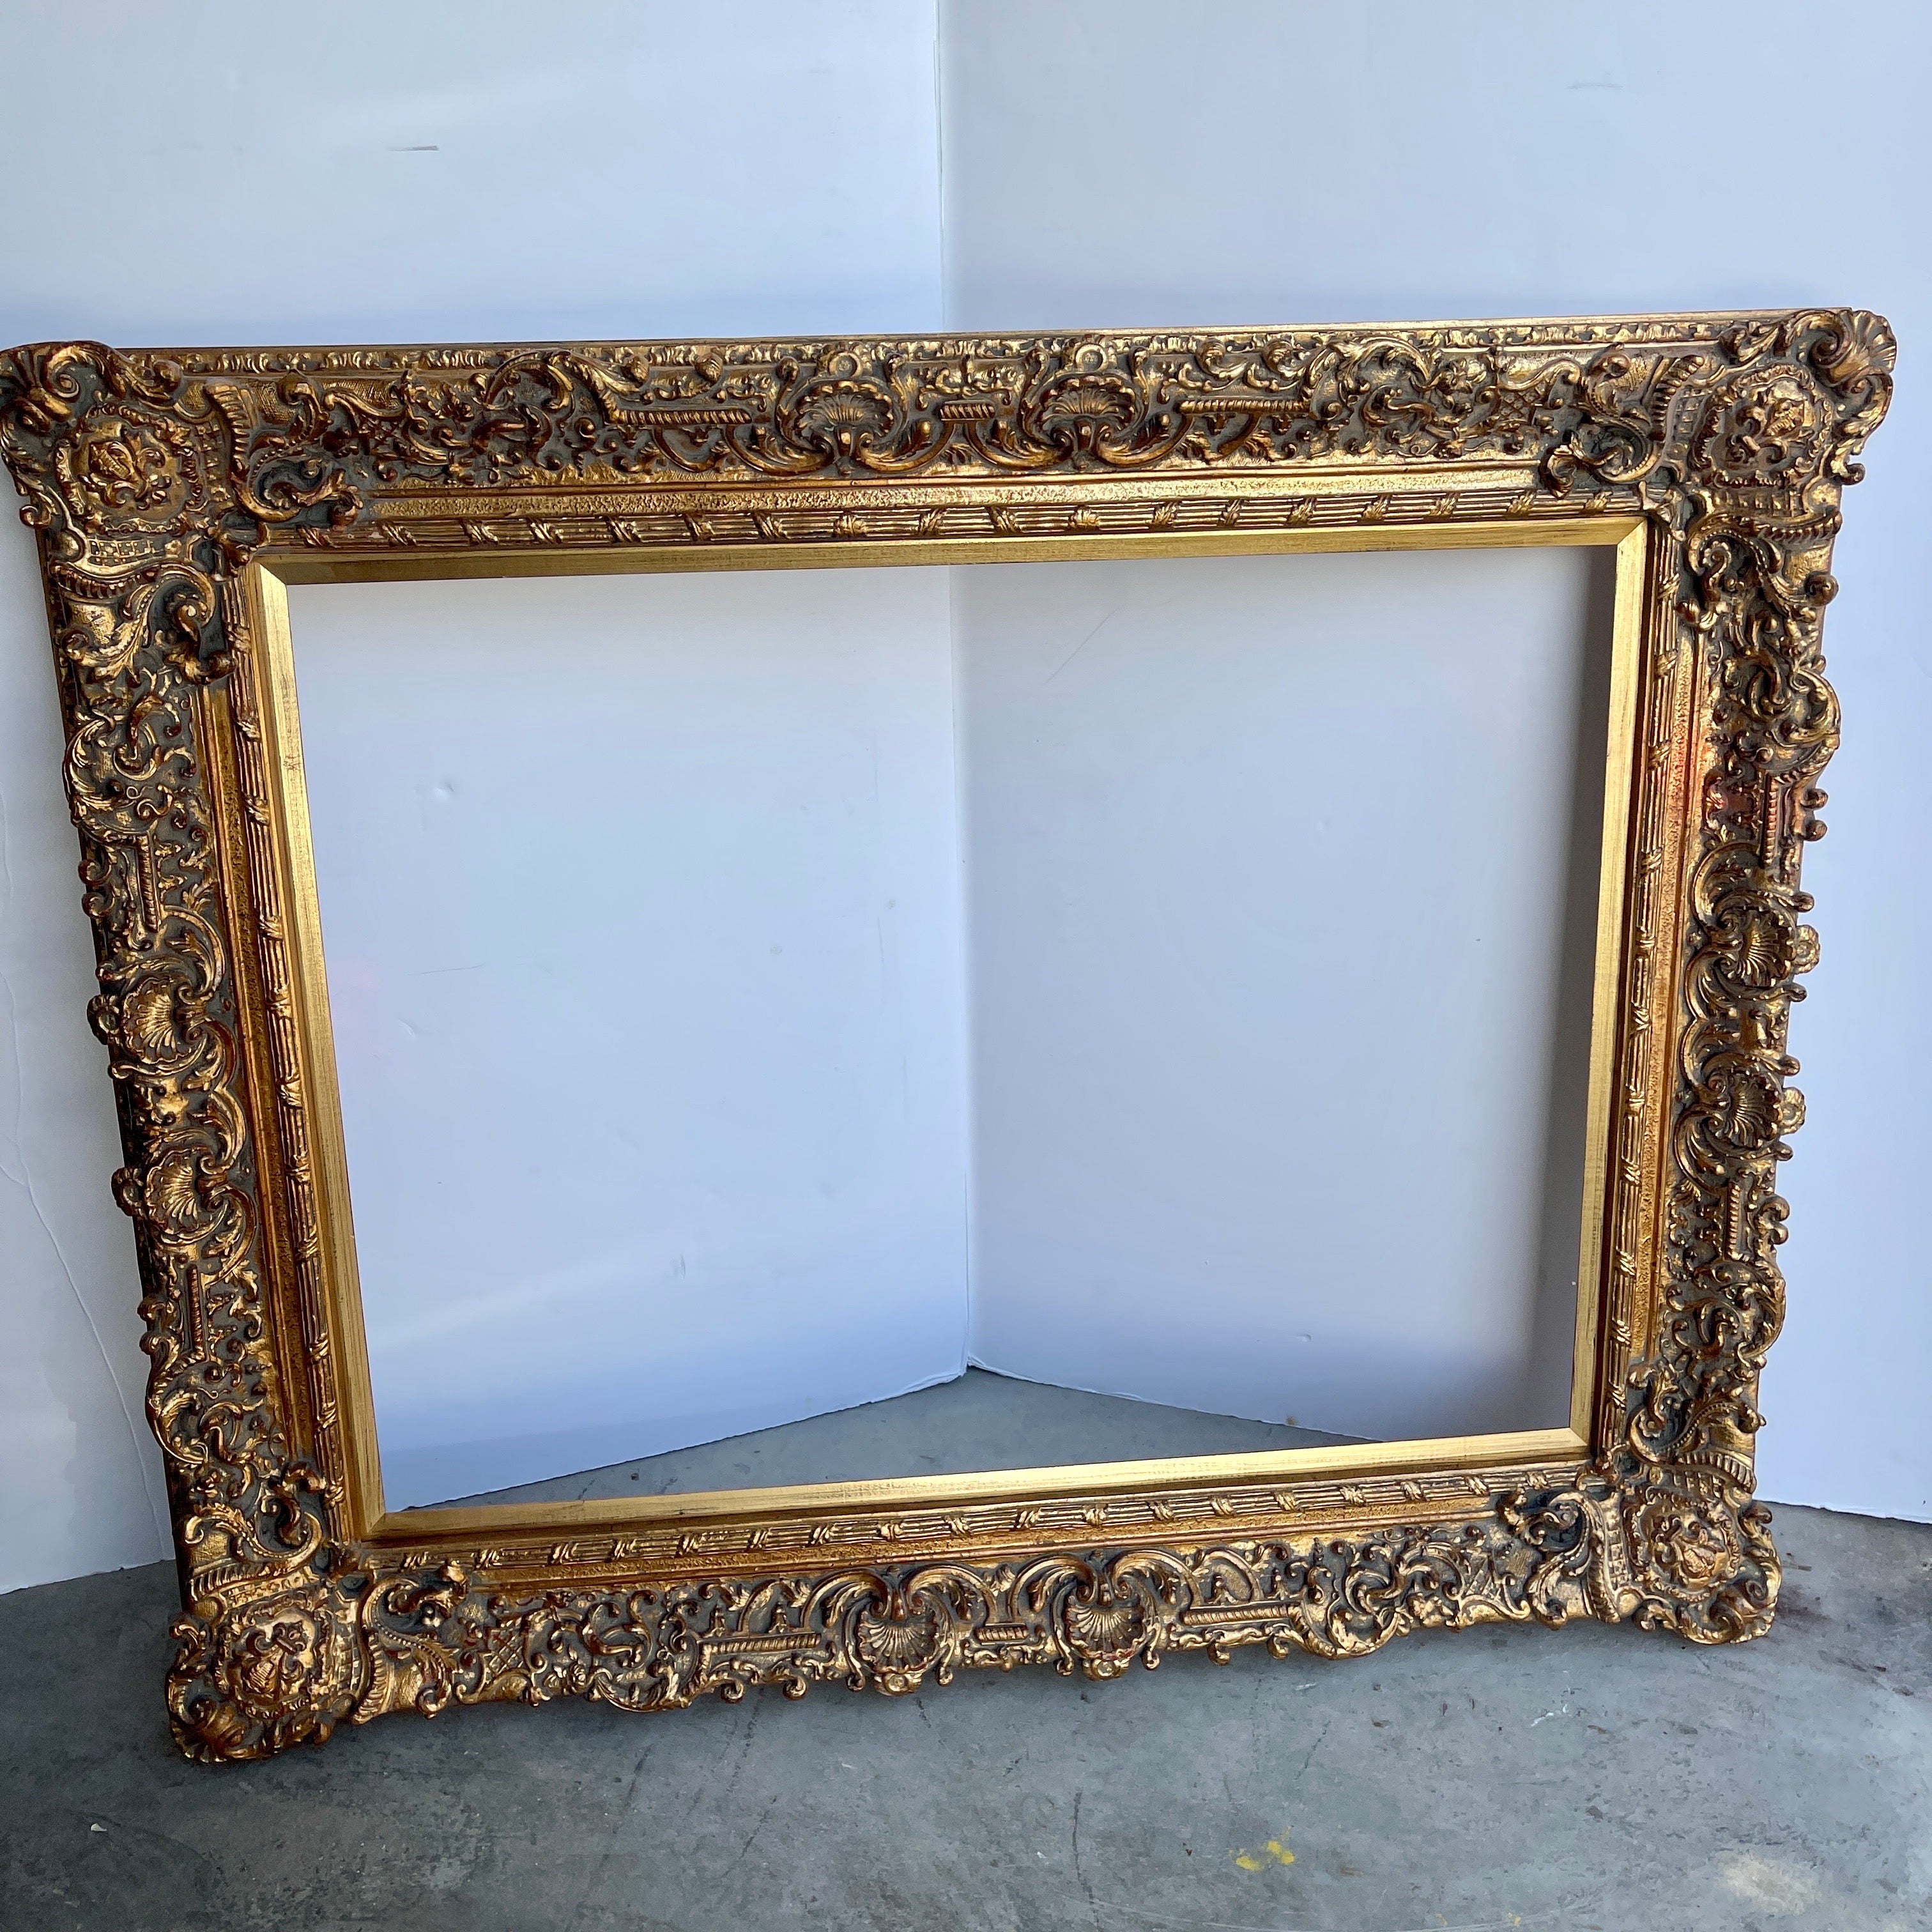 Large Ornate French Rococo Style Carved Ornate Gilt Wood Frame.

This gorgeous hand-crafted frame has lots of charming details including fleur de lis in the corners, shell motifs as well as other fantastic features. This substantial piece could be